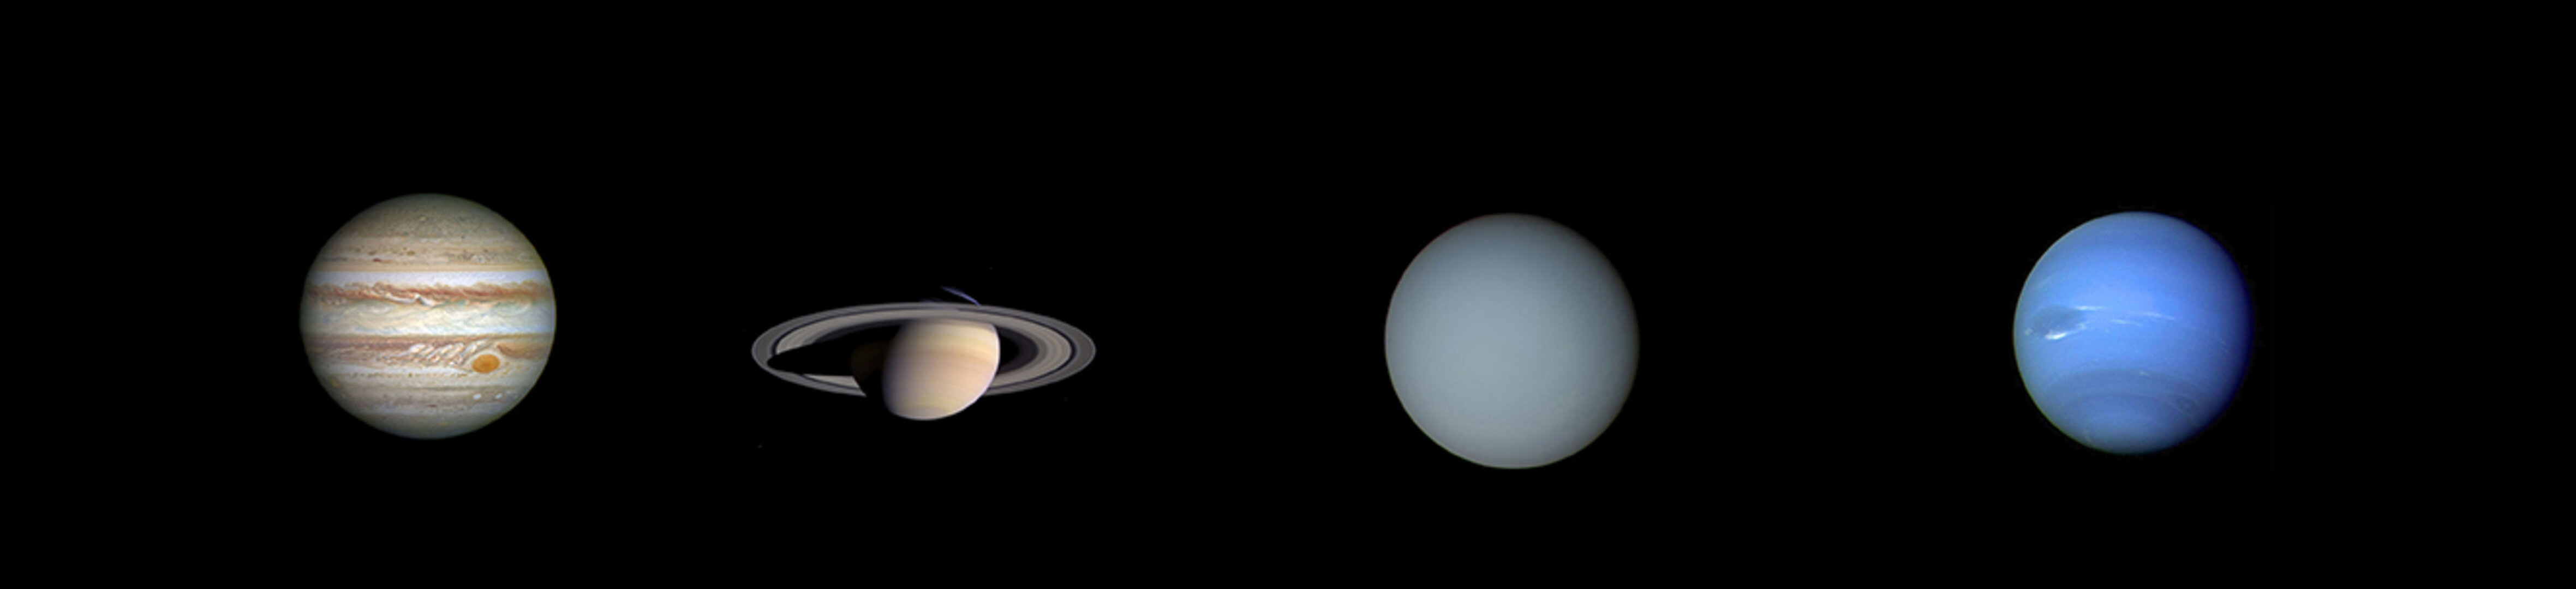 The outer (giant) planets. The images shown here are not to scale.